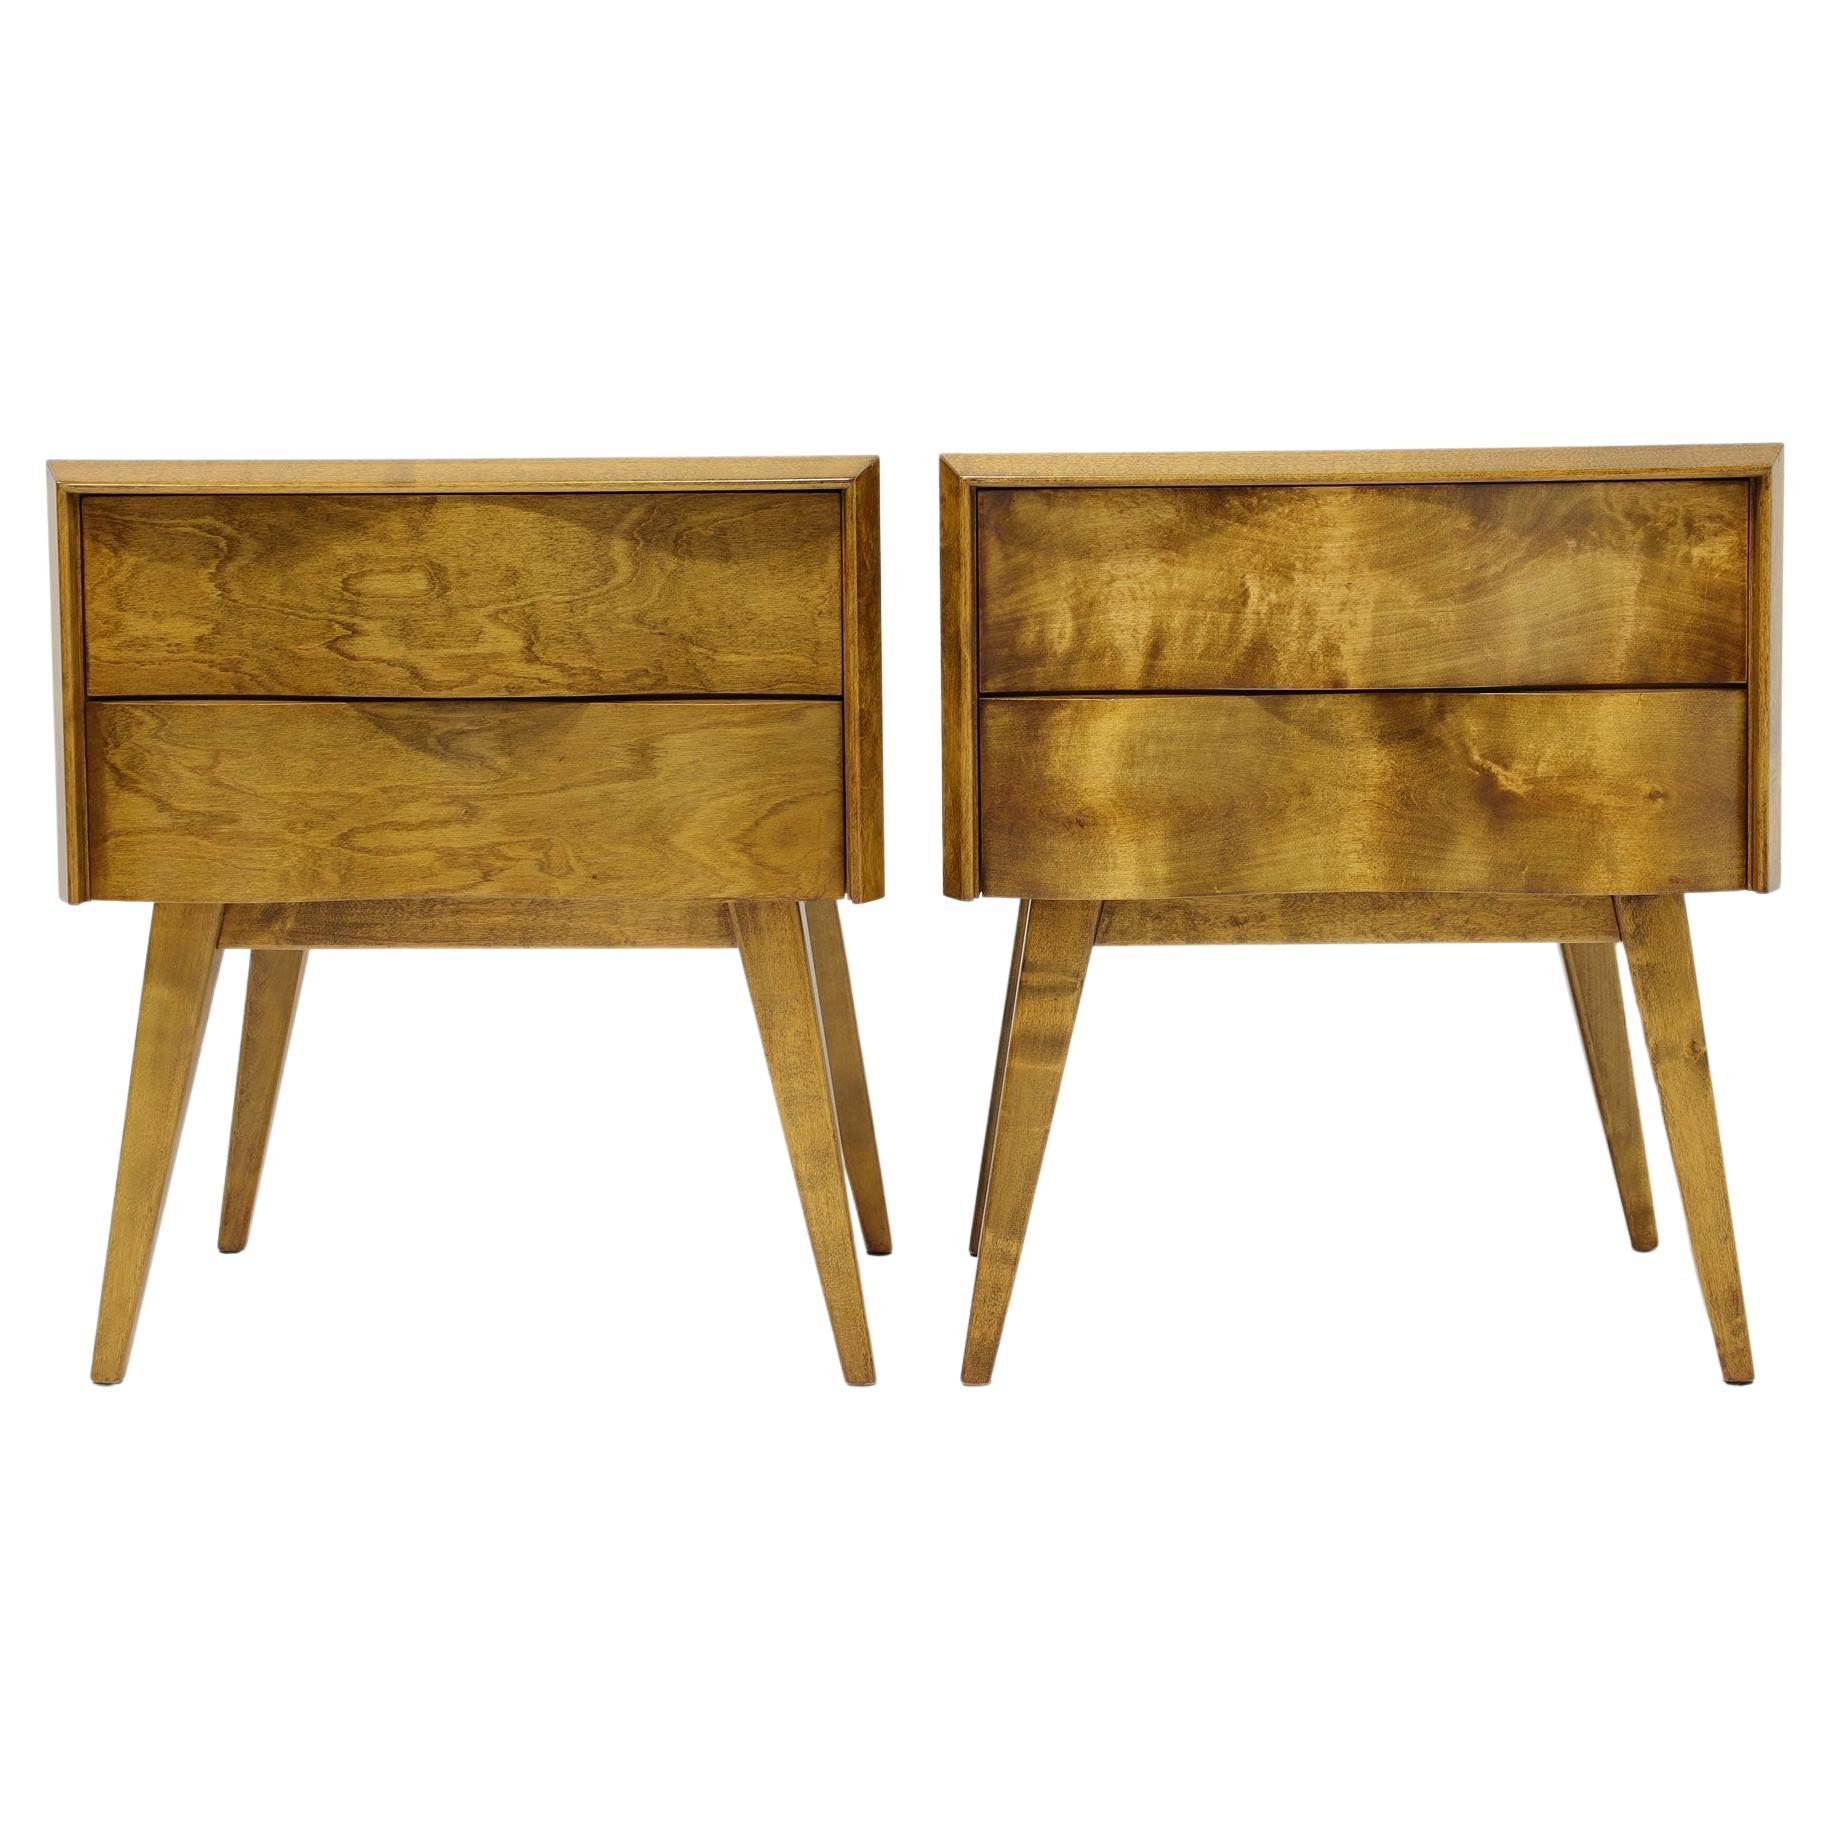 Pair of Swedish Mid-Century (1940s) wave front birchwood nightstands with two drawers in a birchwood case resting on four tapered angled legs. 